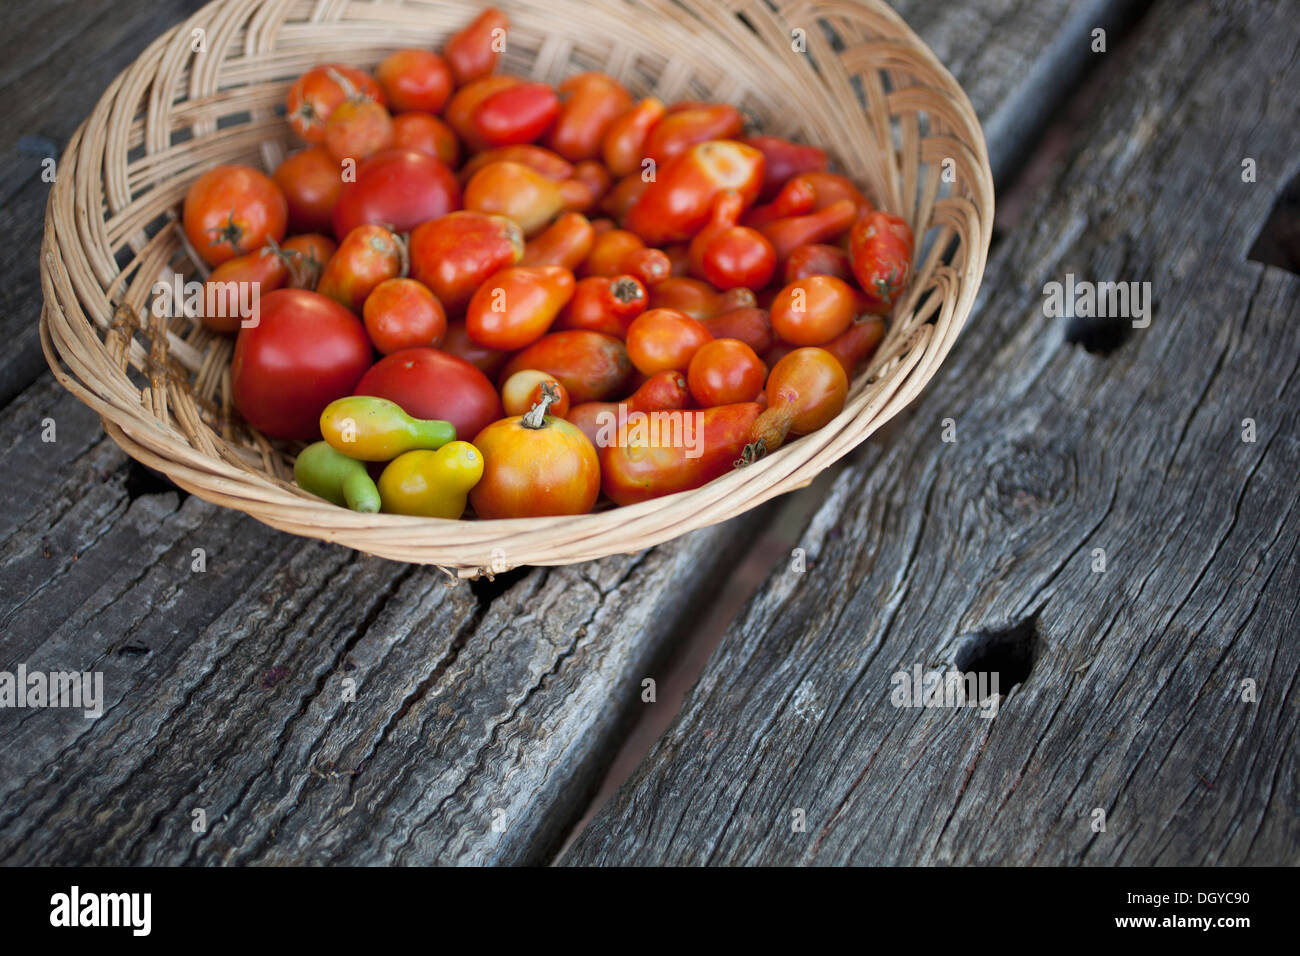 Basket of freshly picked tomatoes on old wooden table Stock Photo